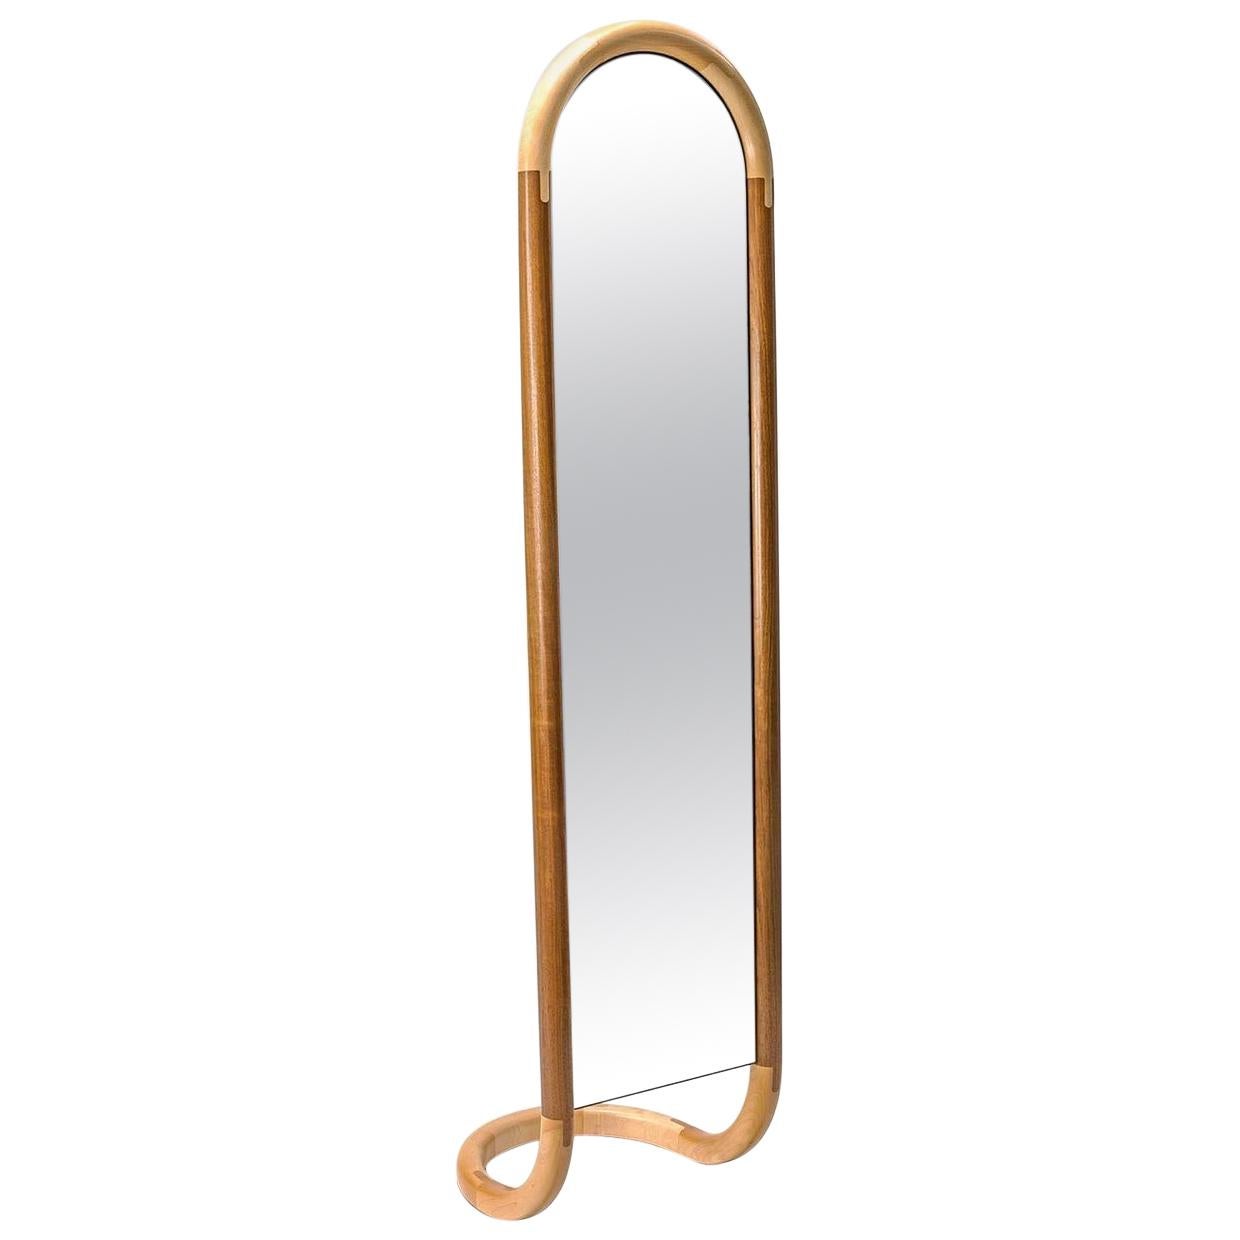 Standing Halo Mirror, Birnam Wood Studio, Represented by Tuleste Factory For Sale